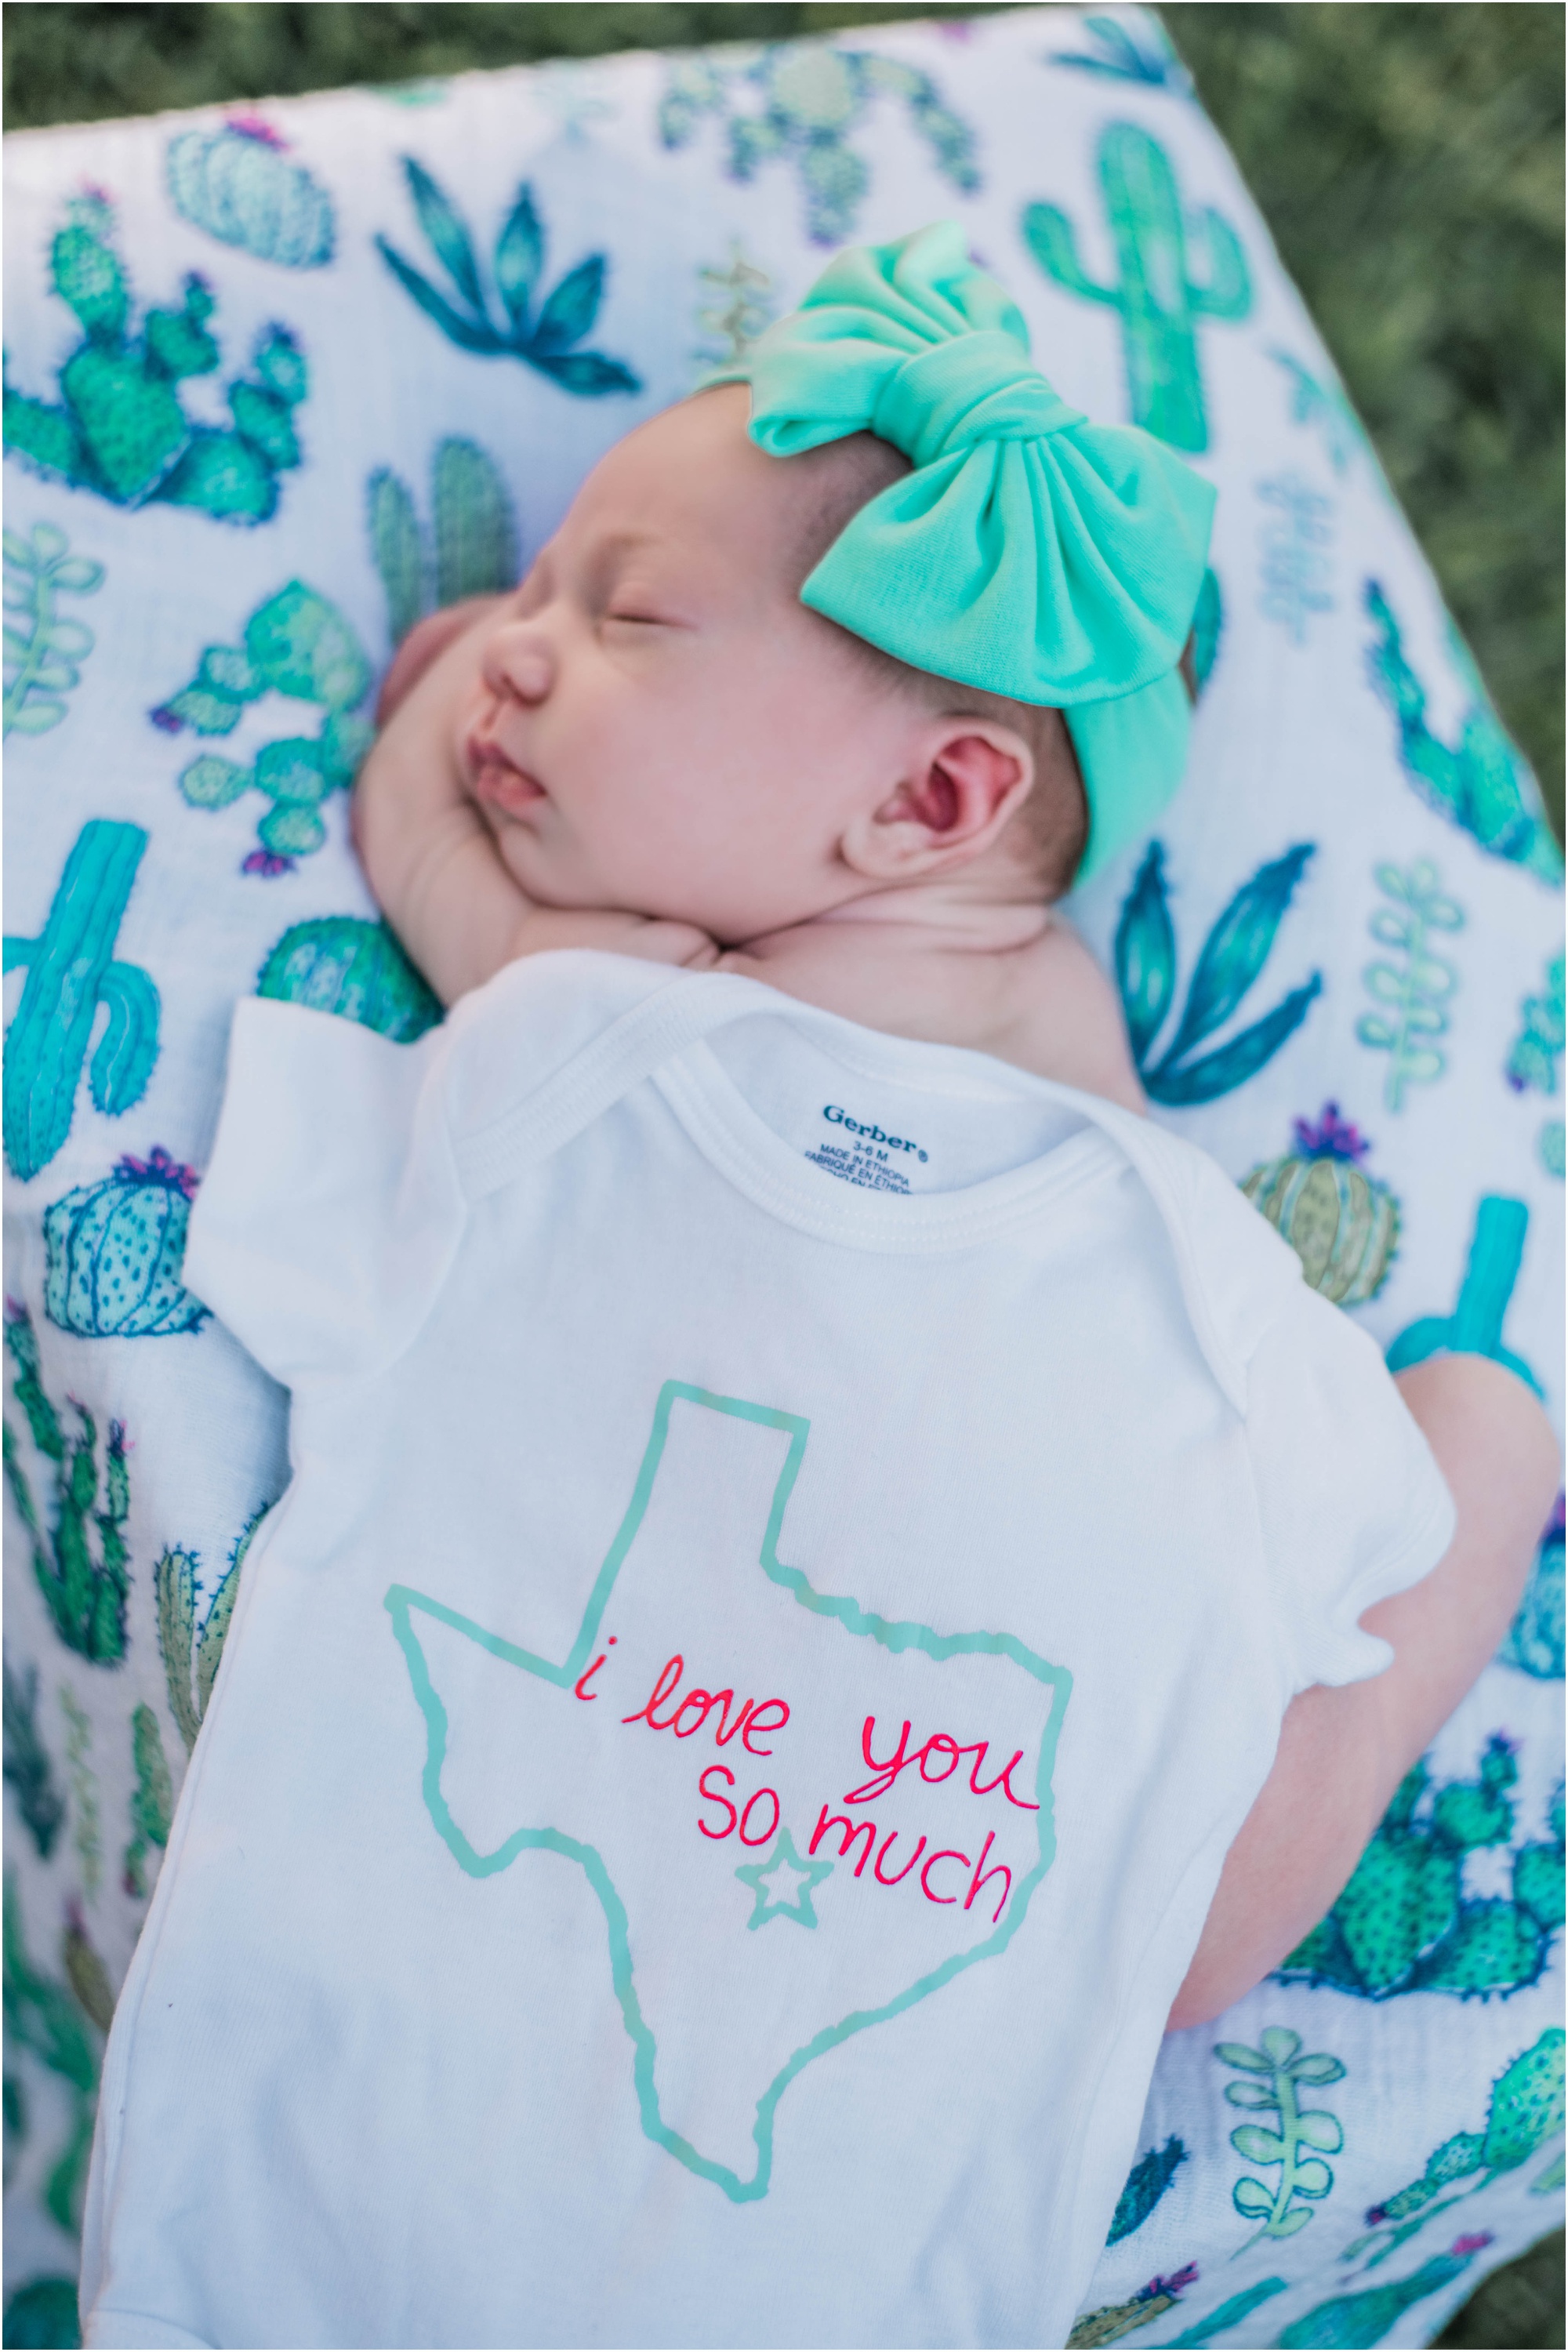 Keep Austin Weird I Love You So Much Newborn Baby Girl In Austin Texas Summer Photoshoot In Wooden Crate Wearing Turquoise Bow Natural Light Photoshoot Maegan Kylie Photography